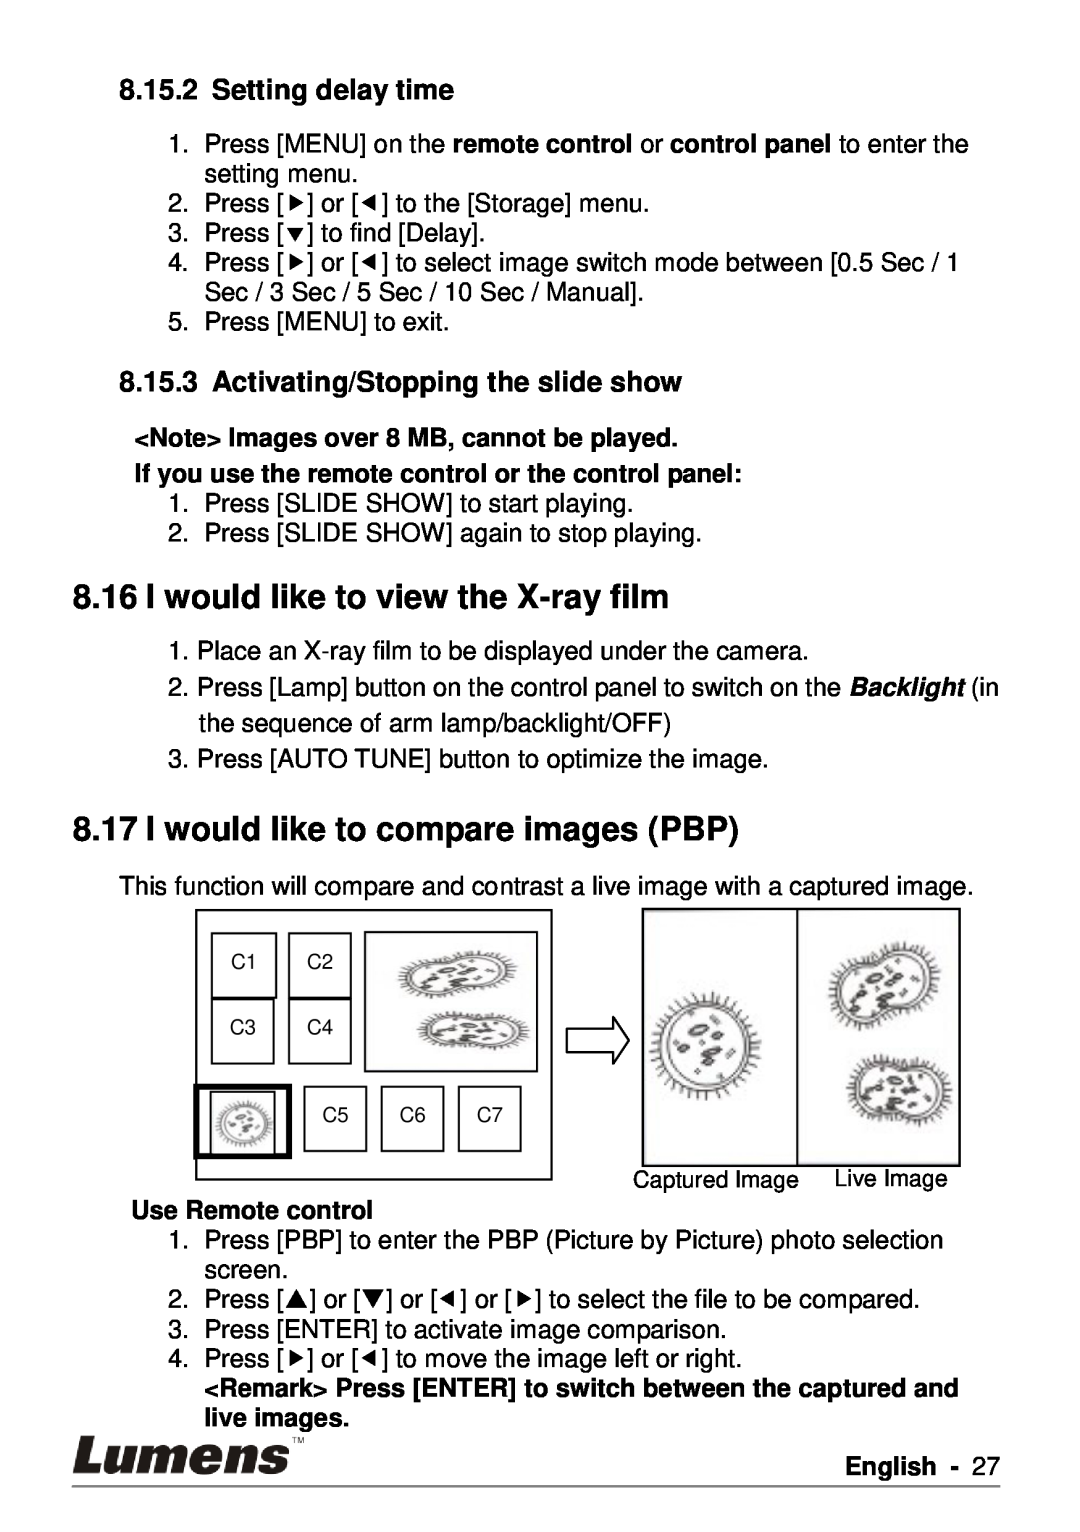 Lumens Technology PS750 I would like to view the X-ray film, I would like to compare images PBP, Setting delay time 